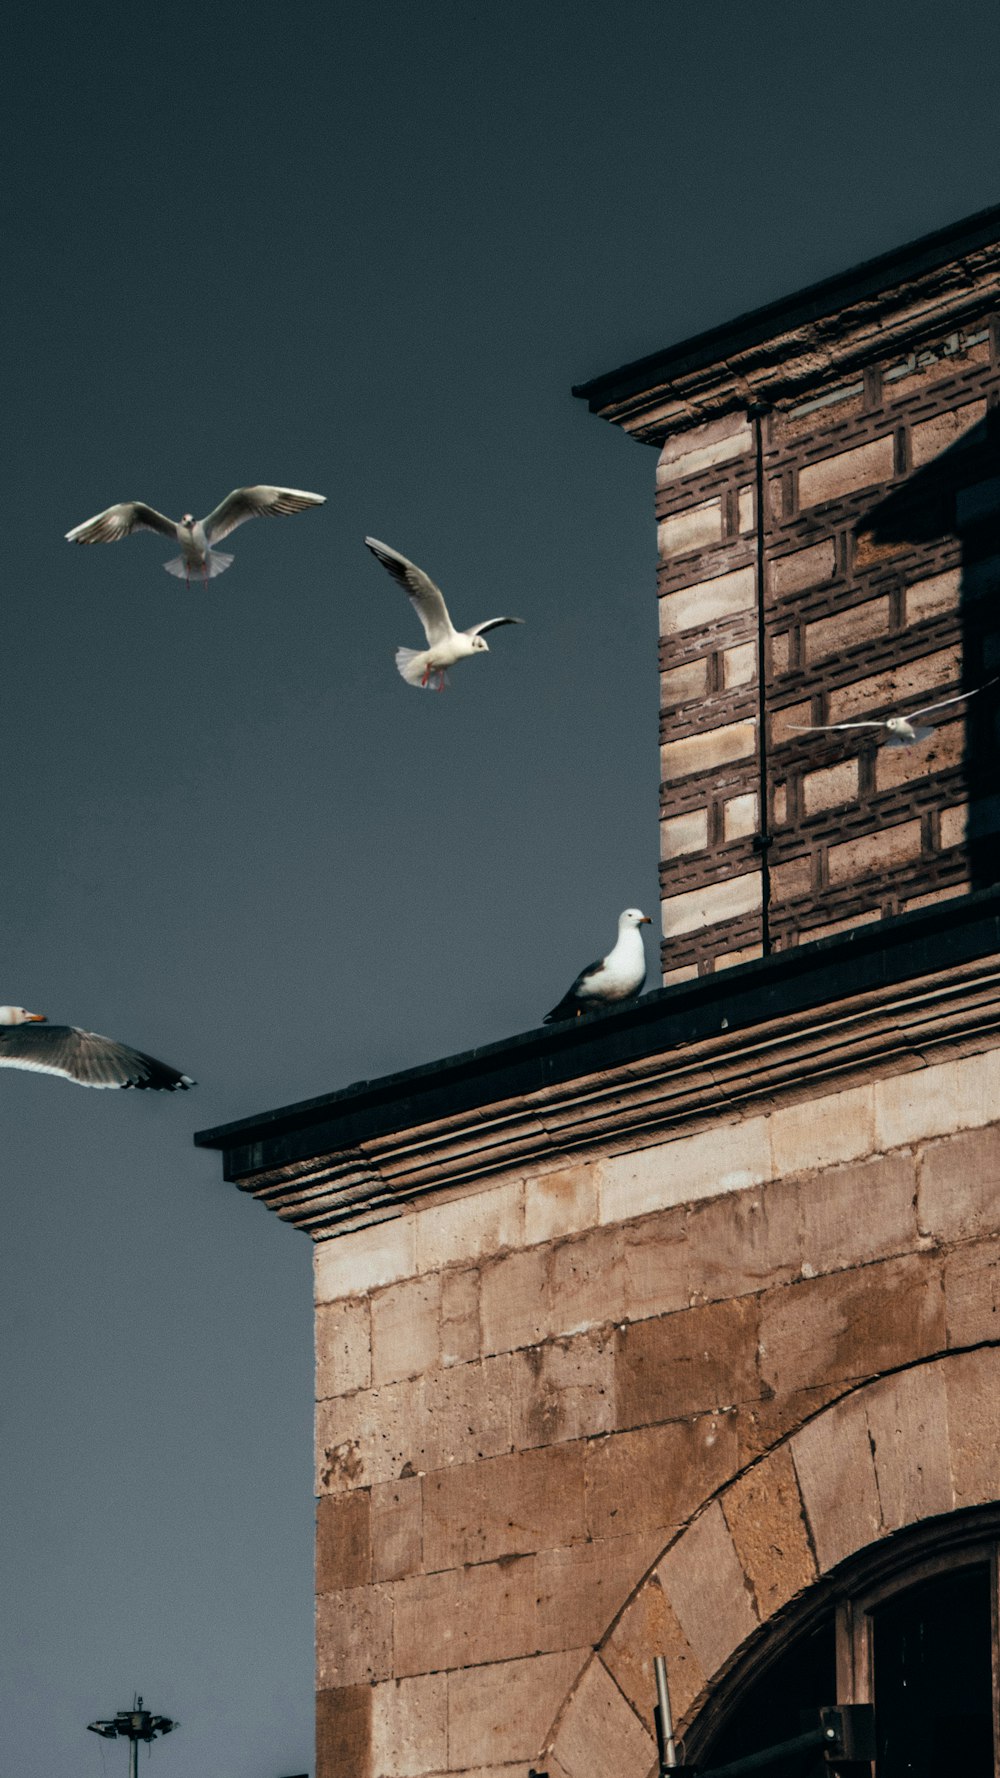 a flock of birds flying over a brick building